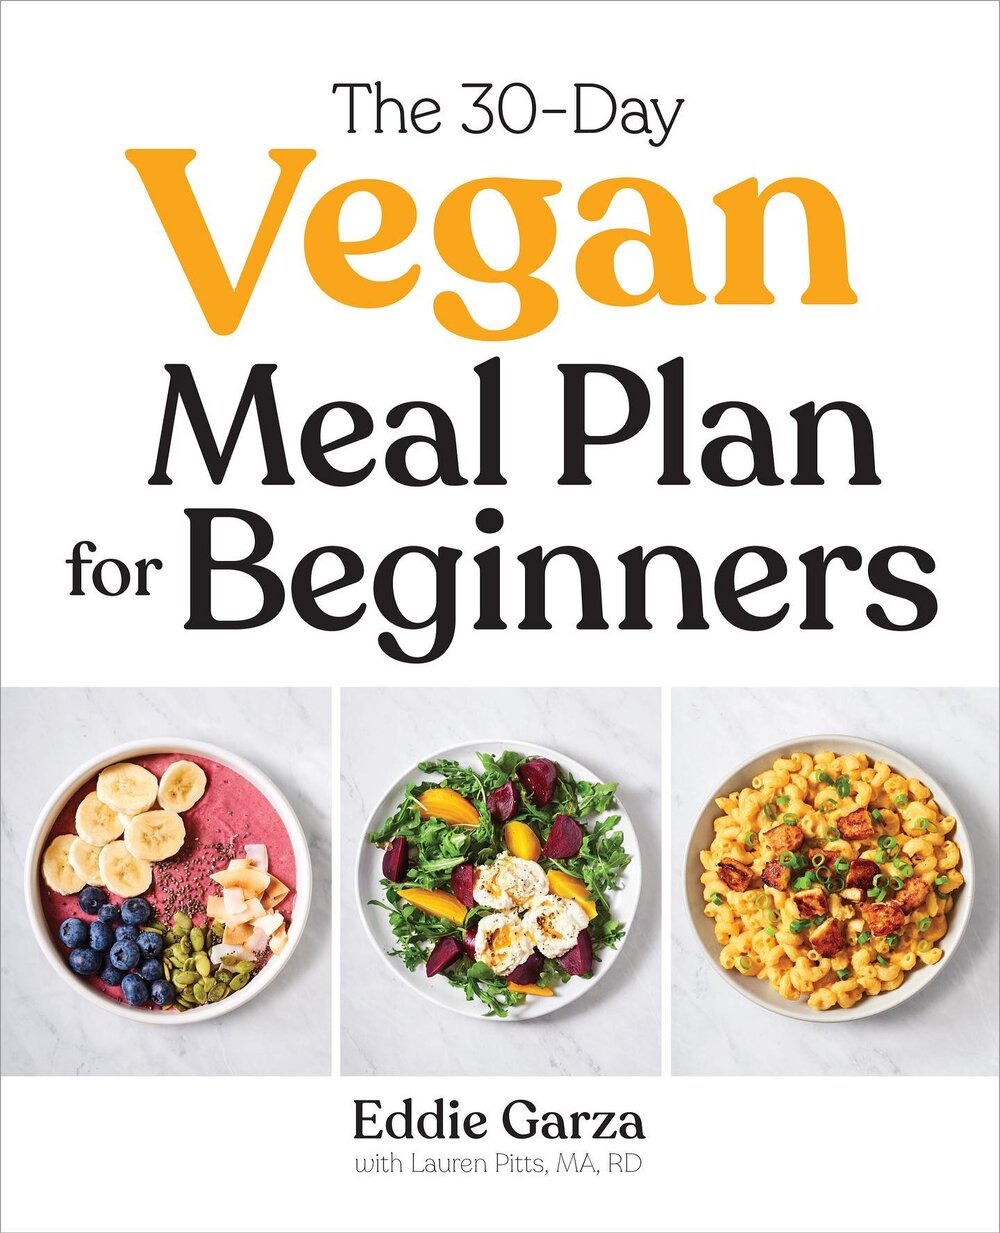 A must have ... The 30 day vegan meal plan for beginners  by @theeddiegarza
Goes on presale Jan 12 
Feb 9 release